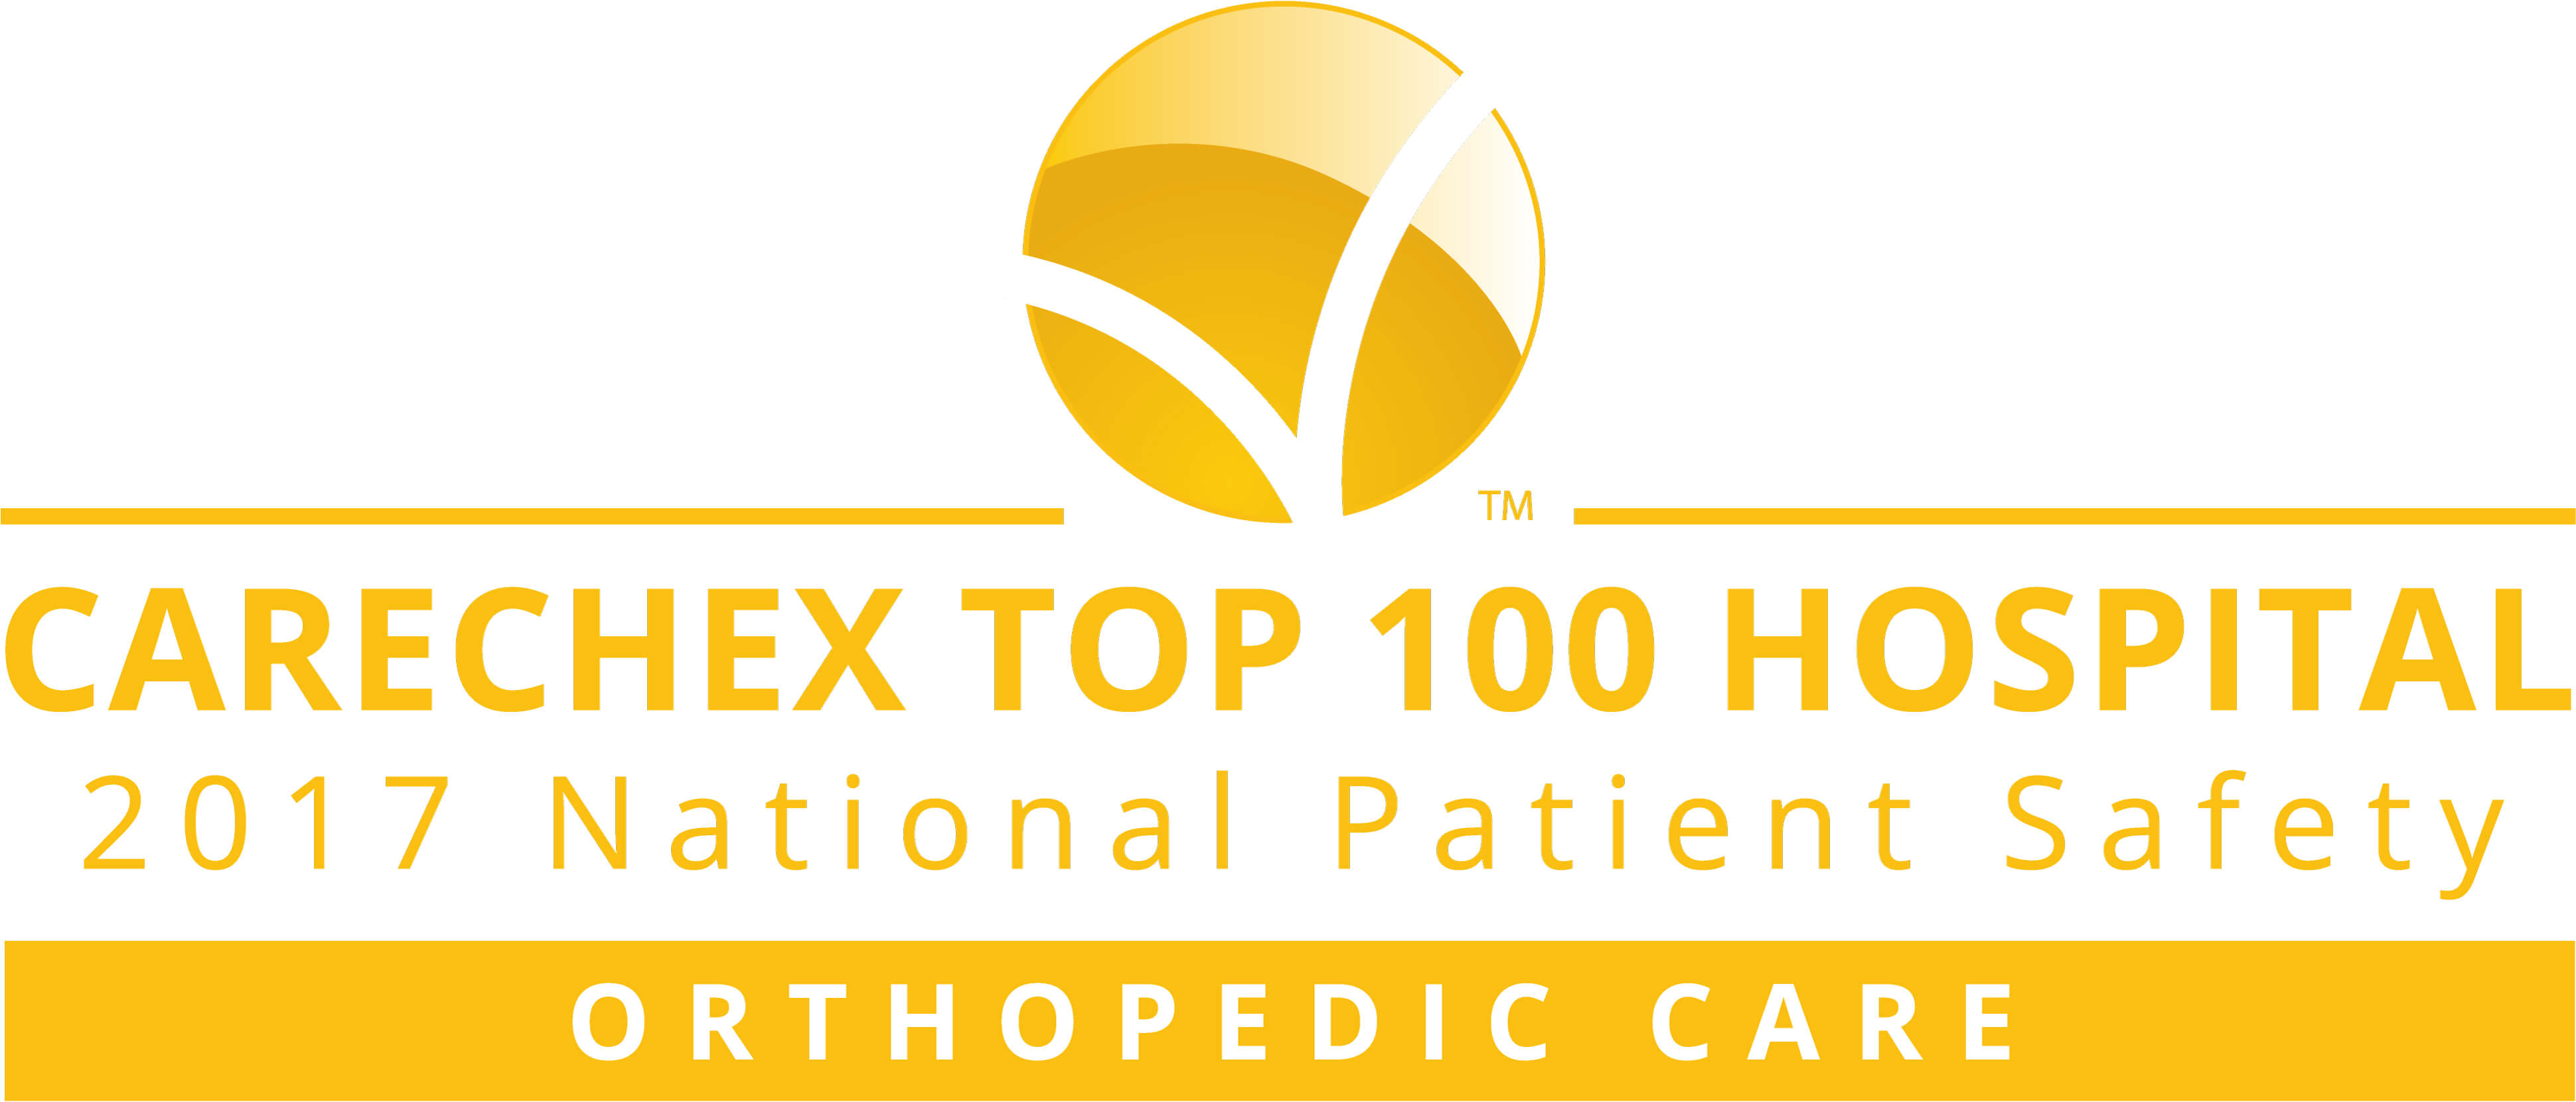 2017 CareCheck Top 100 Hospital National Patient Safety - Orthopedic Care